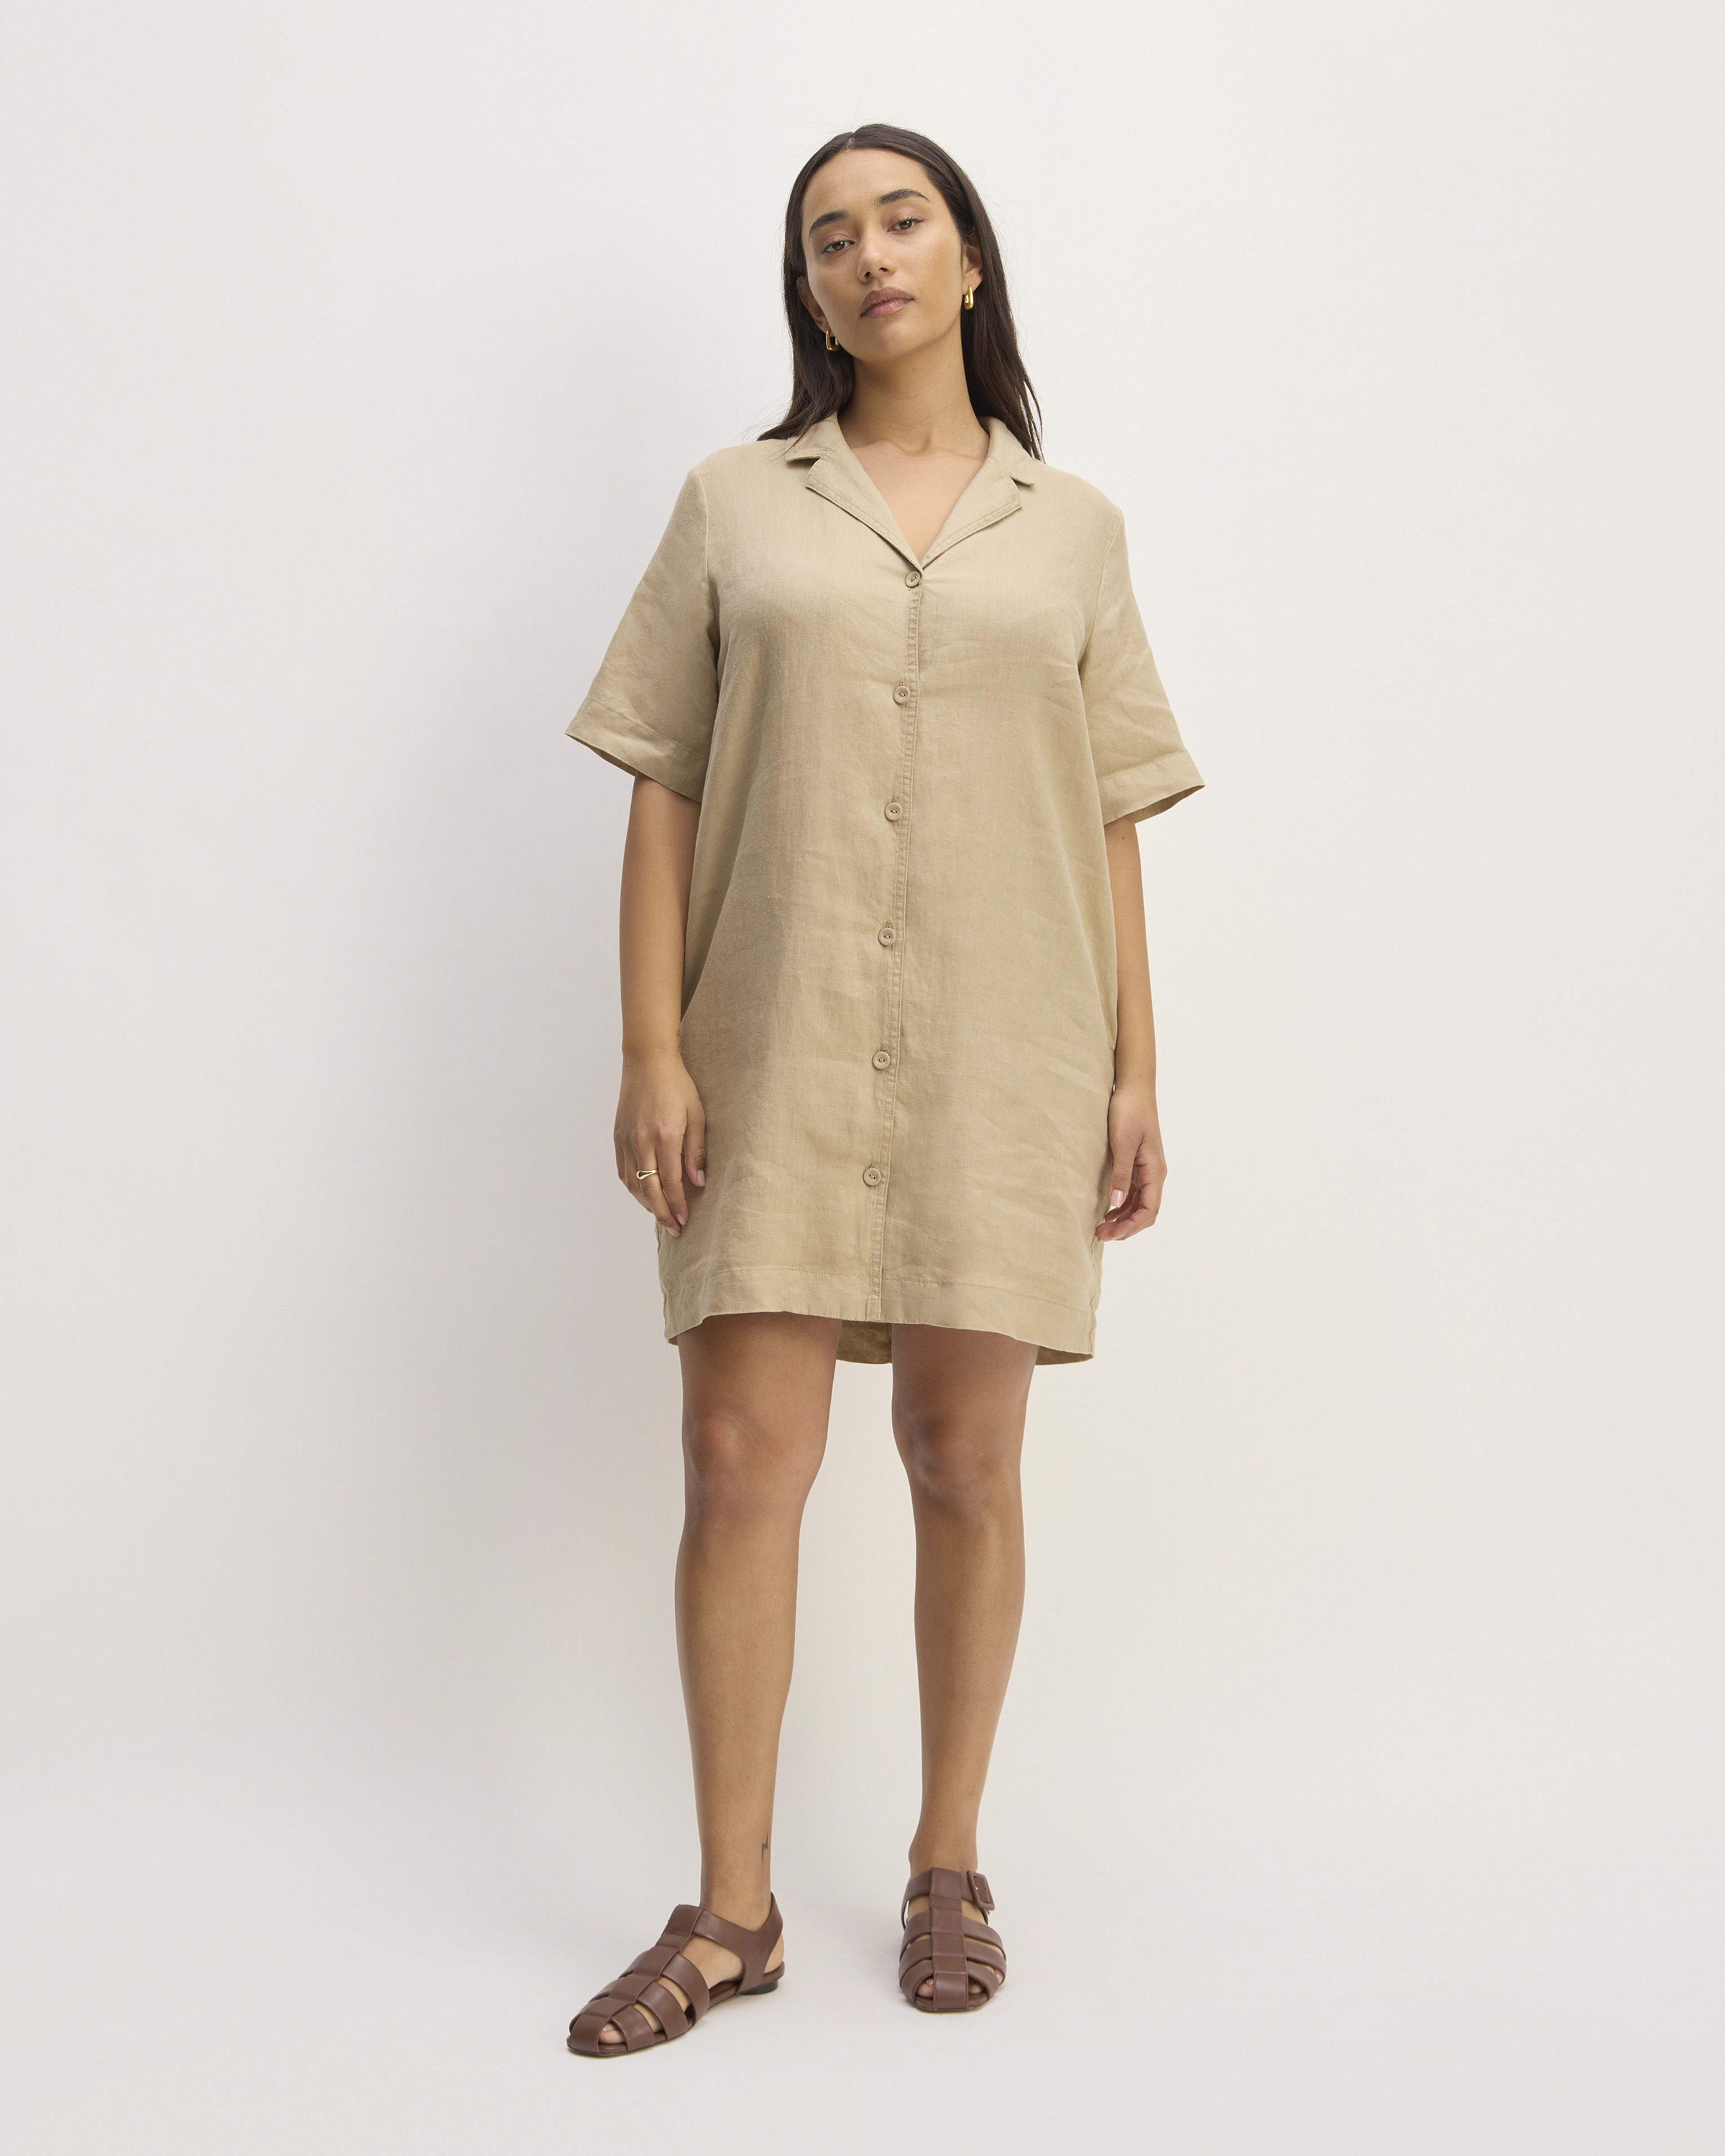 Shop Everlane's Dressed Up Daywear Collection 2023